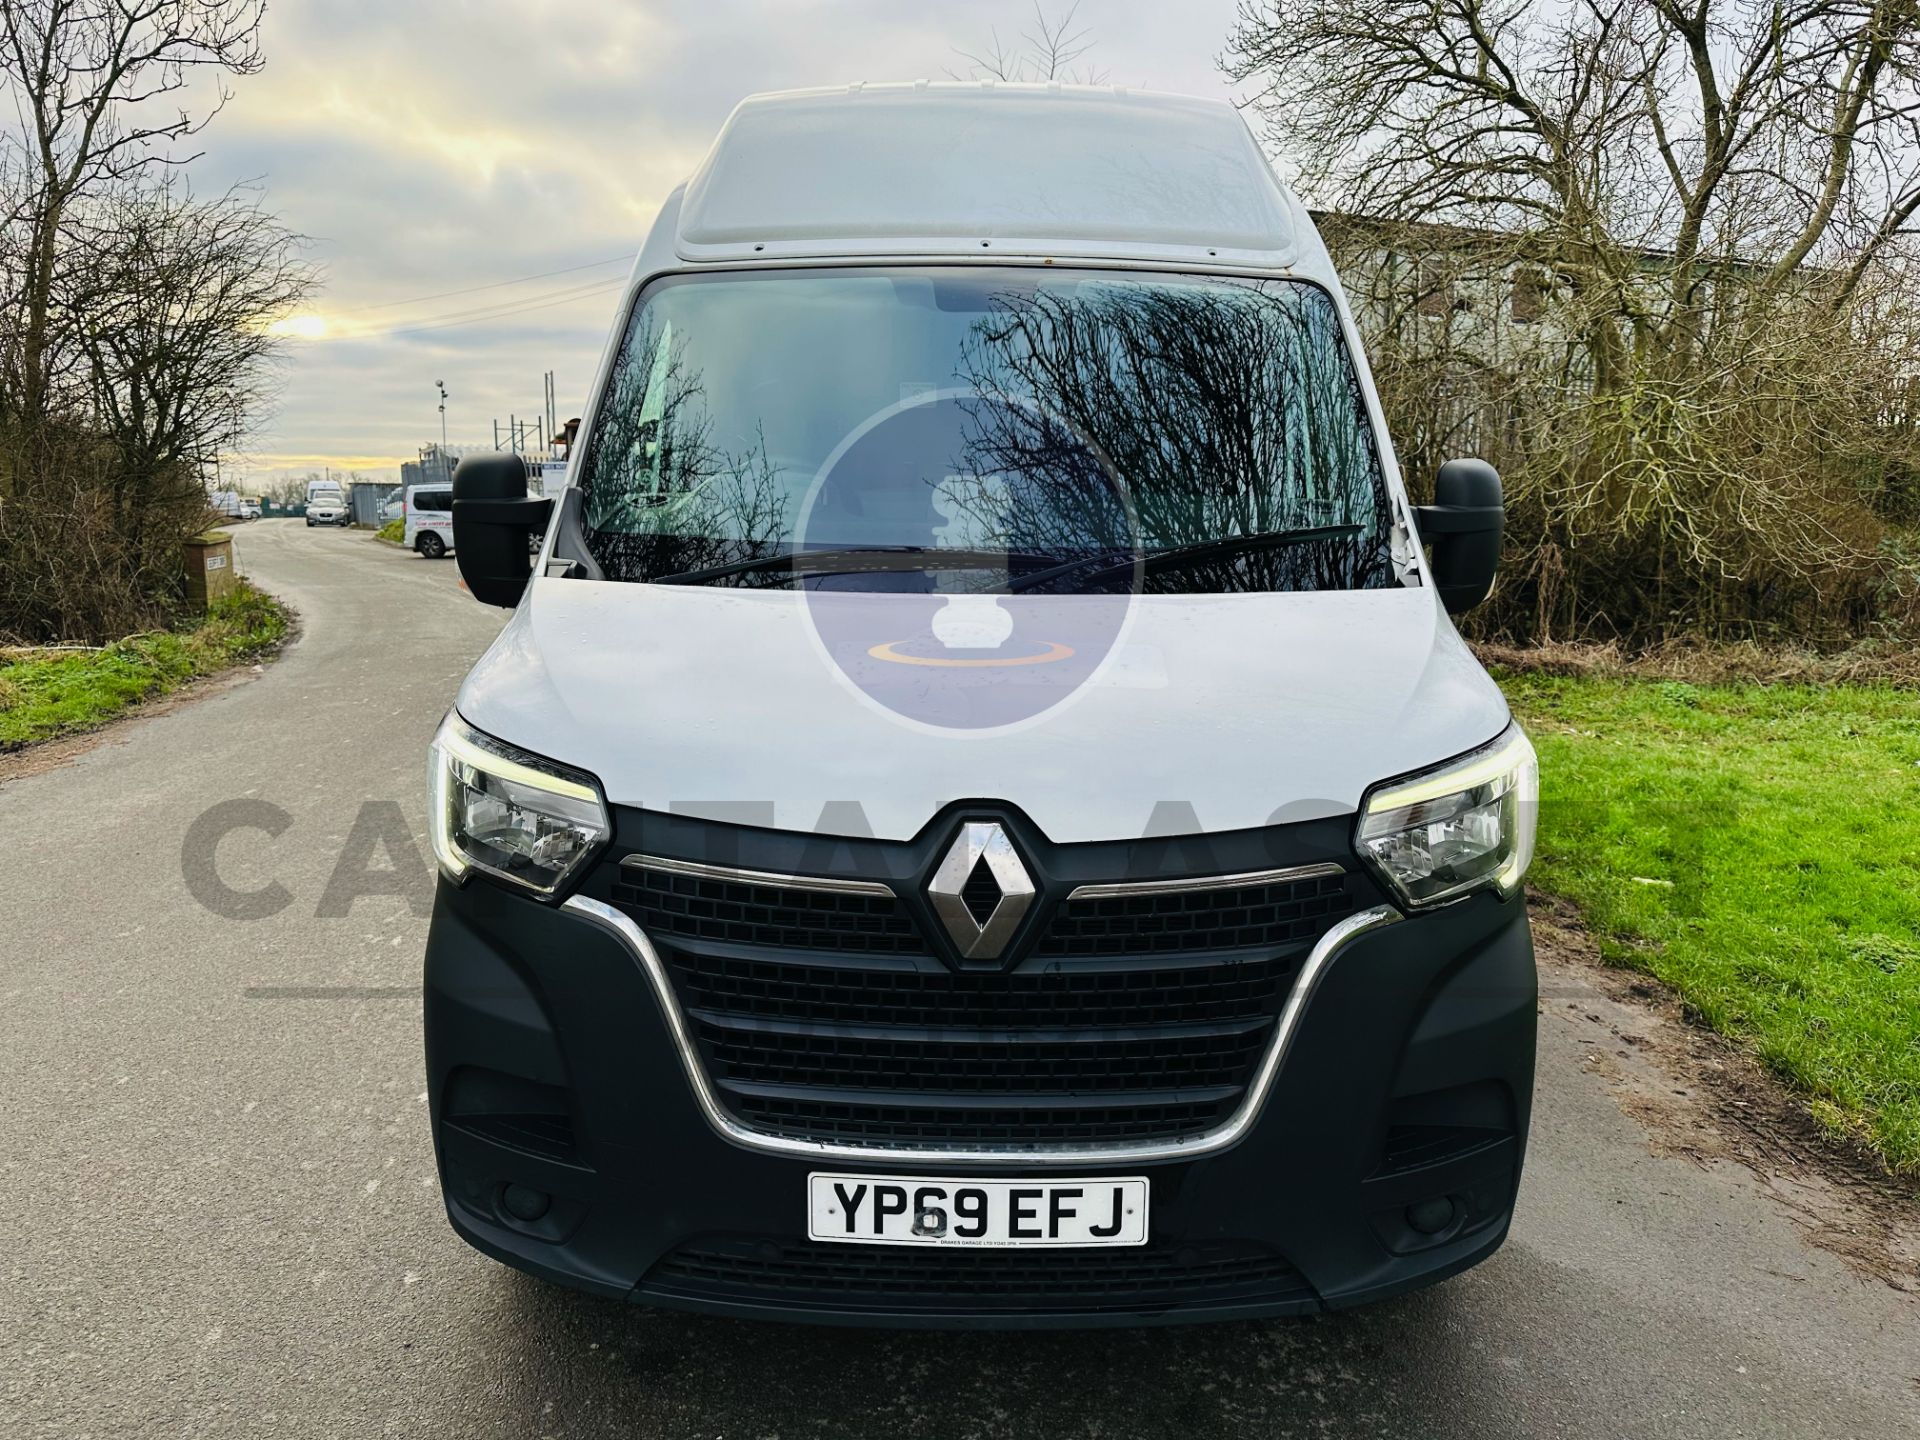 (ON SALE) RENAULT MASTER 2.3 DCI LWB *BUSINESS EDITION* - 2020 MODEL - ONLY 85K MILES - EURO 6 - Image 3 of 25